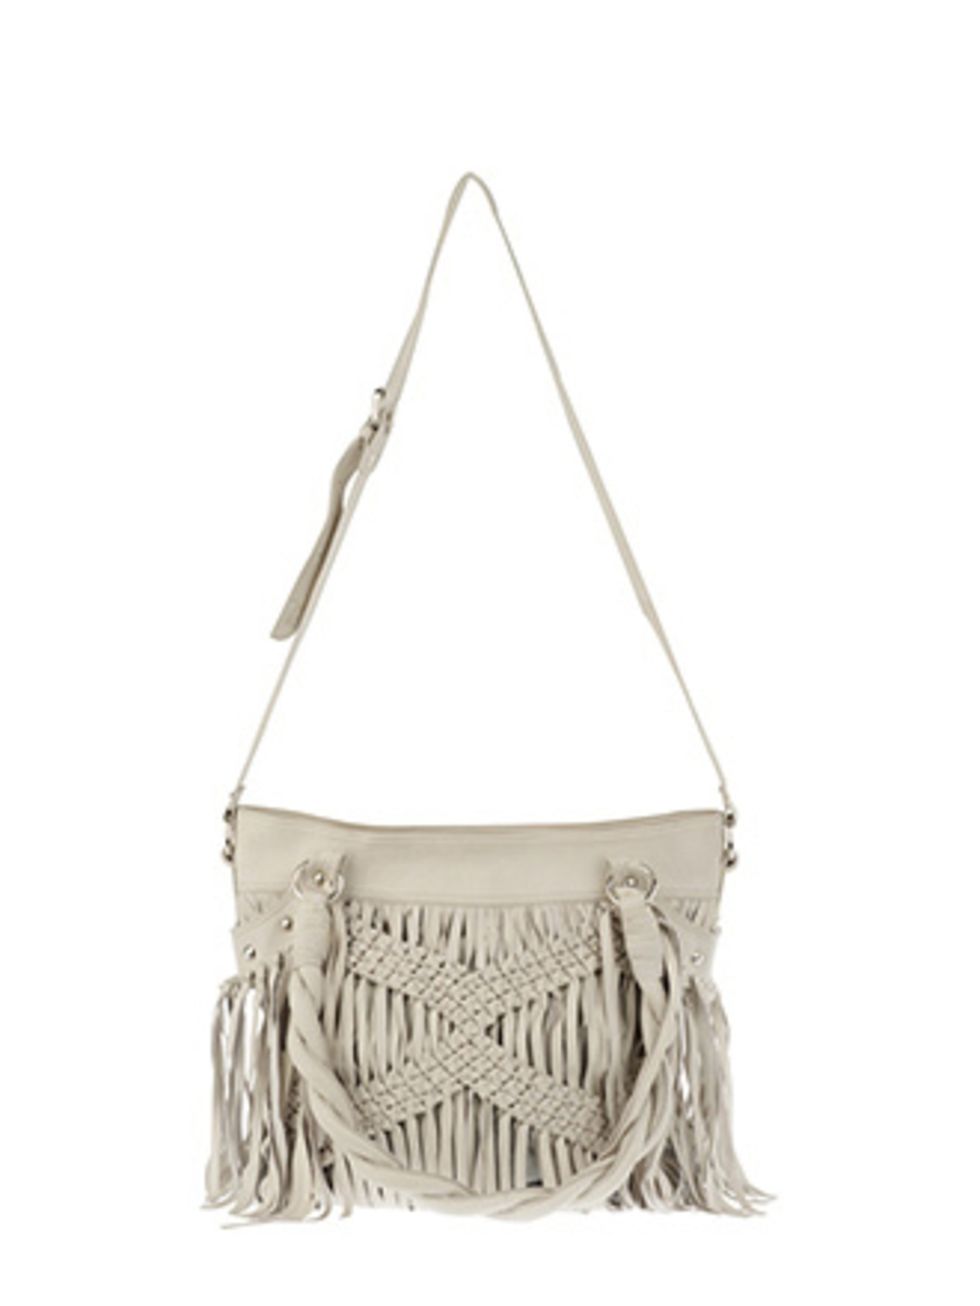 <p>Nude, taupe and mink shades are big news for spring. This bag, with its woven tassel detail and off-white leather make it a spring must-have. Buy it now; we predict it won't stay around for long.</p><p>Leather Bag, £124.99 by  <a href="http://xml.river